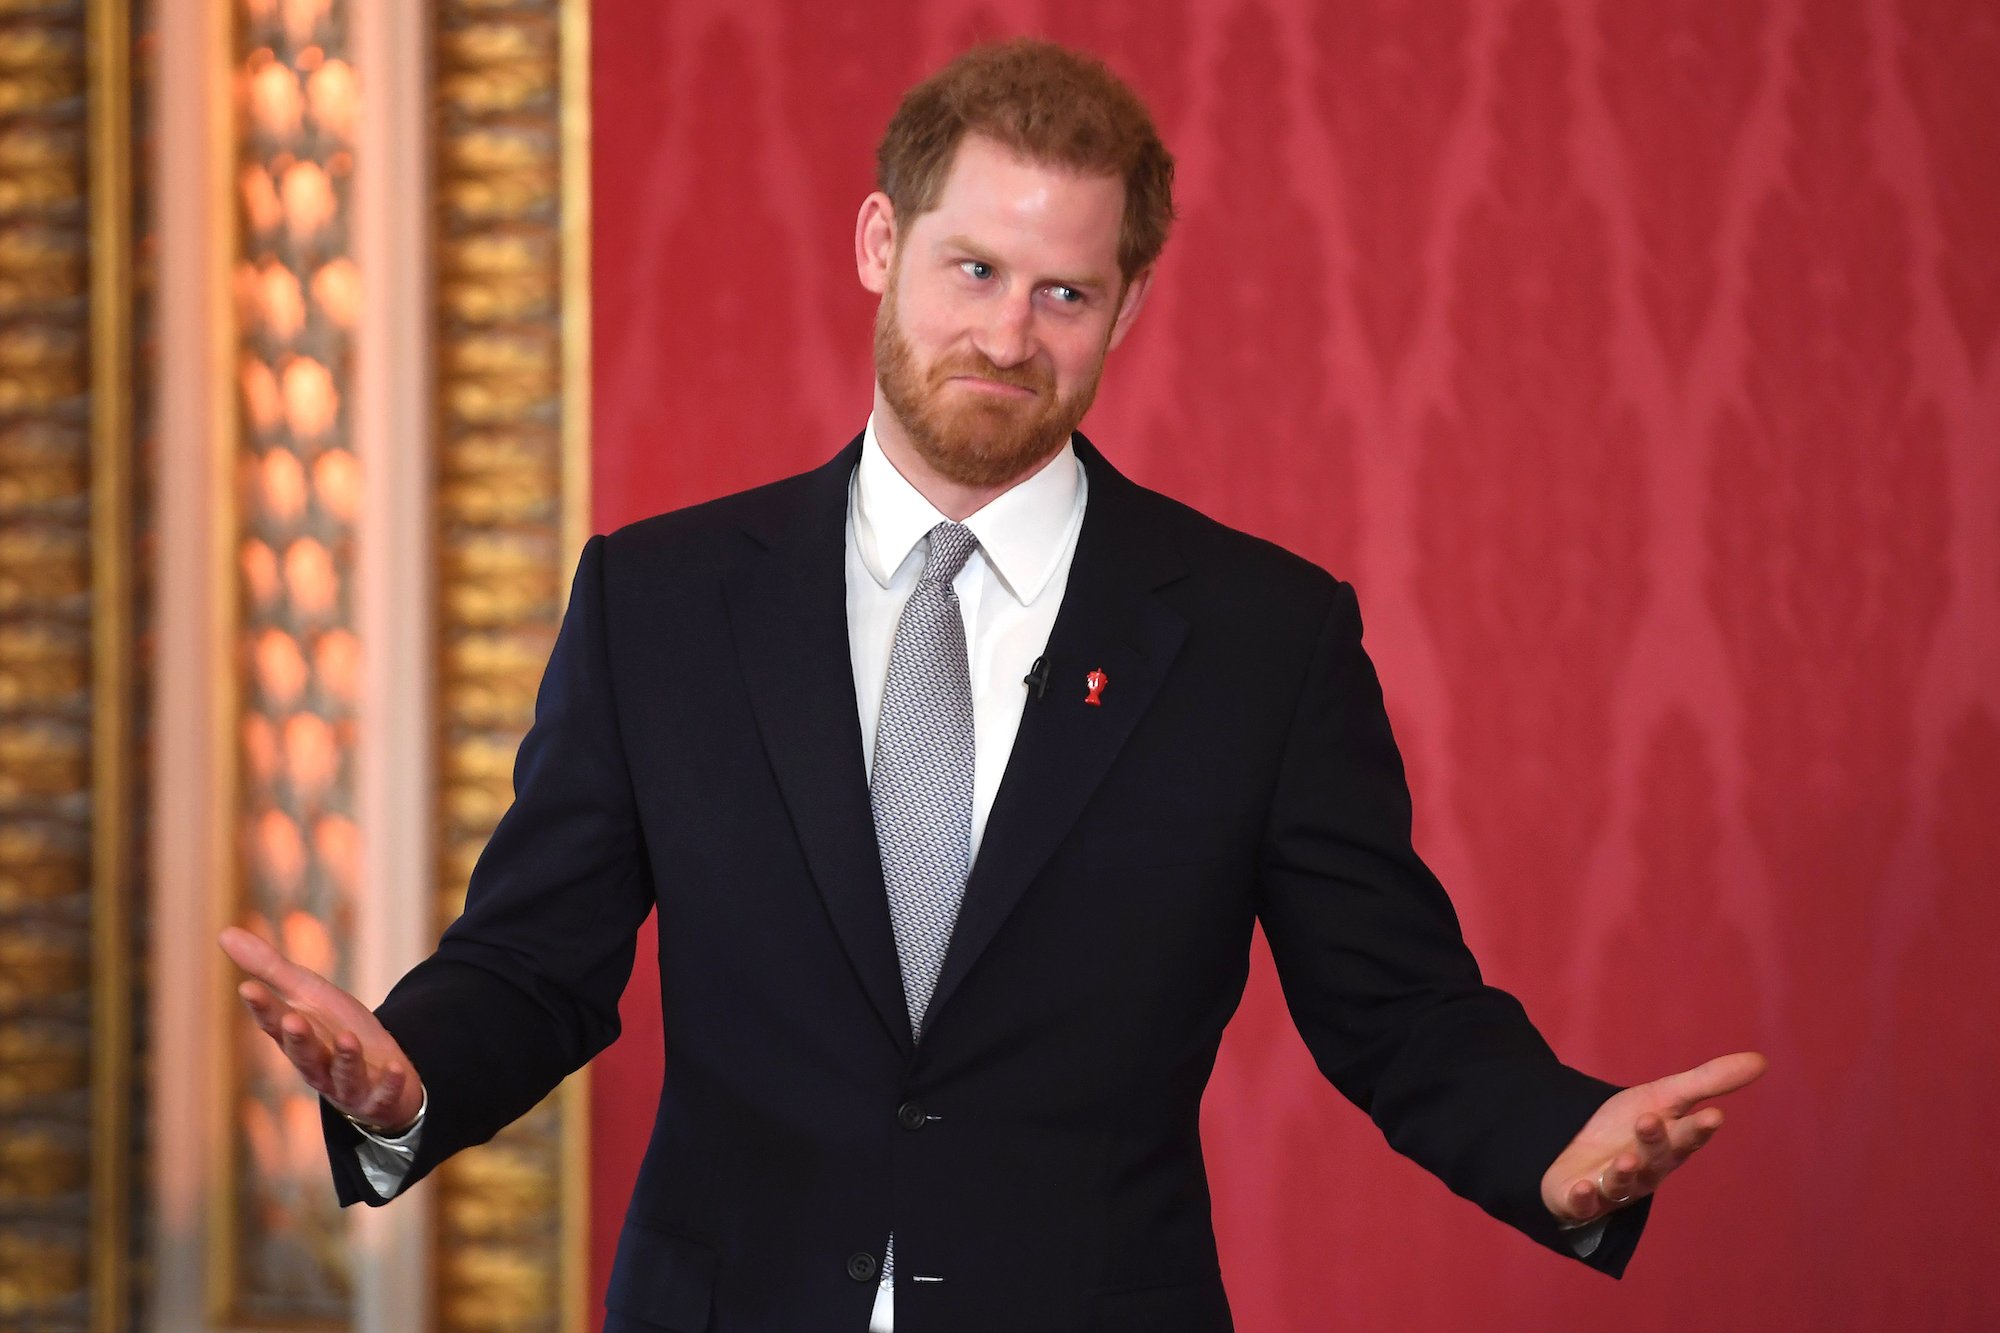 Prince Harry shrugging and smiling in front of a red background